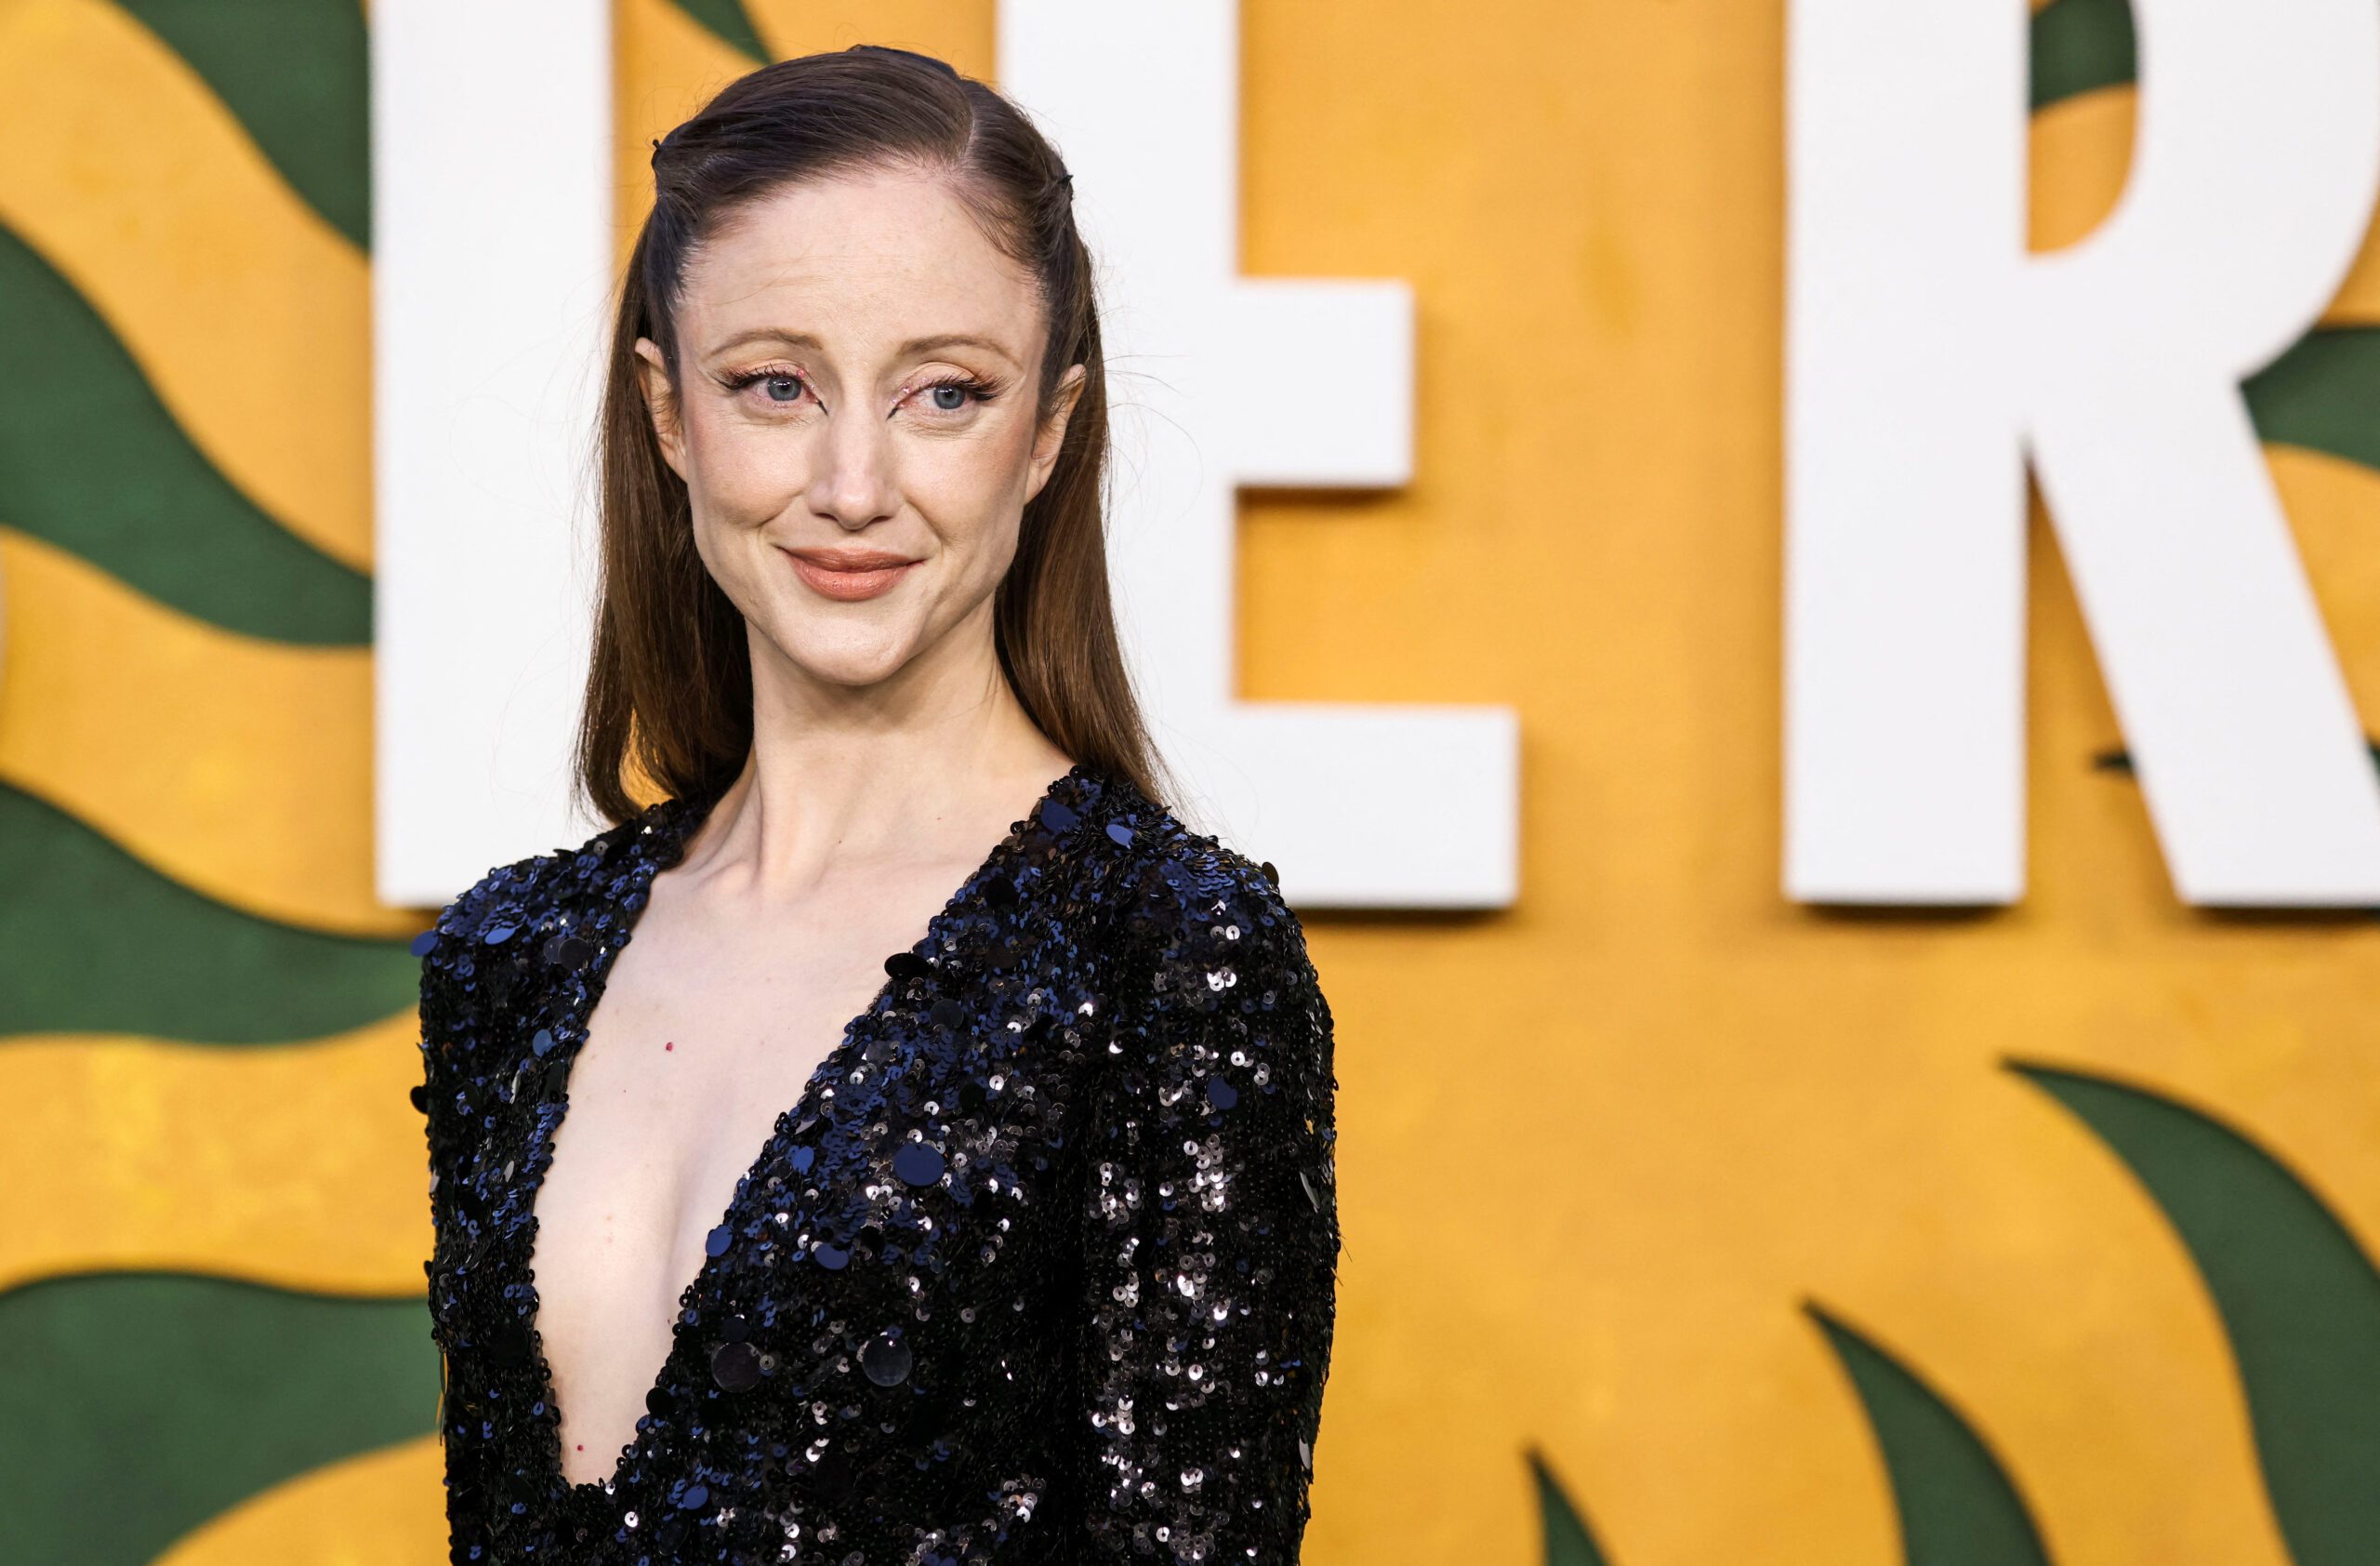 Film academy says it will not disqualify surprise Oscar nominee Andrea Riseborough